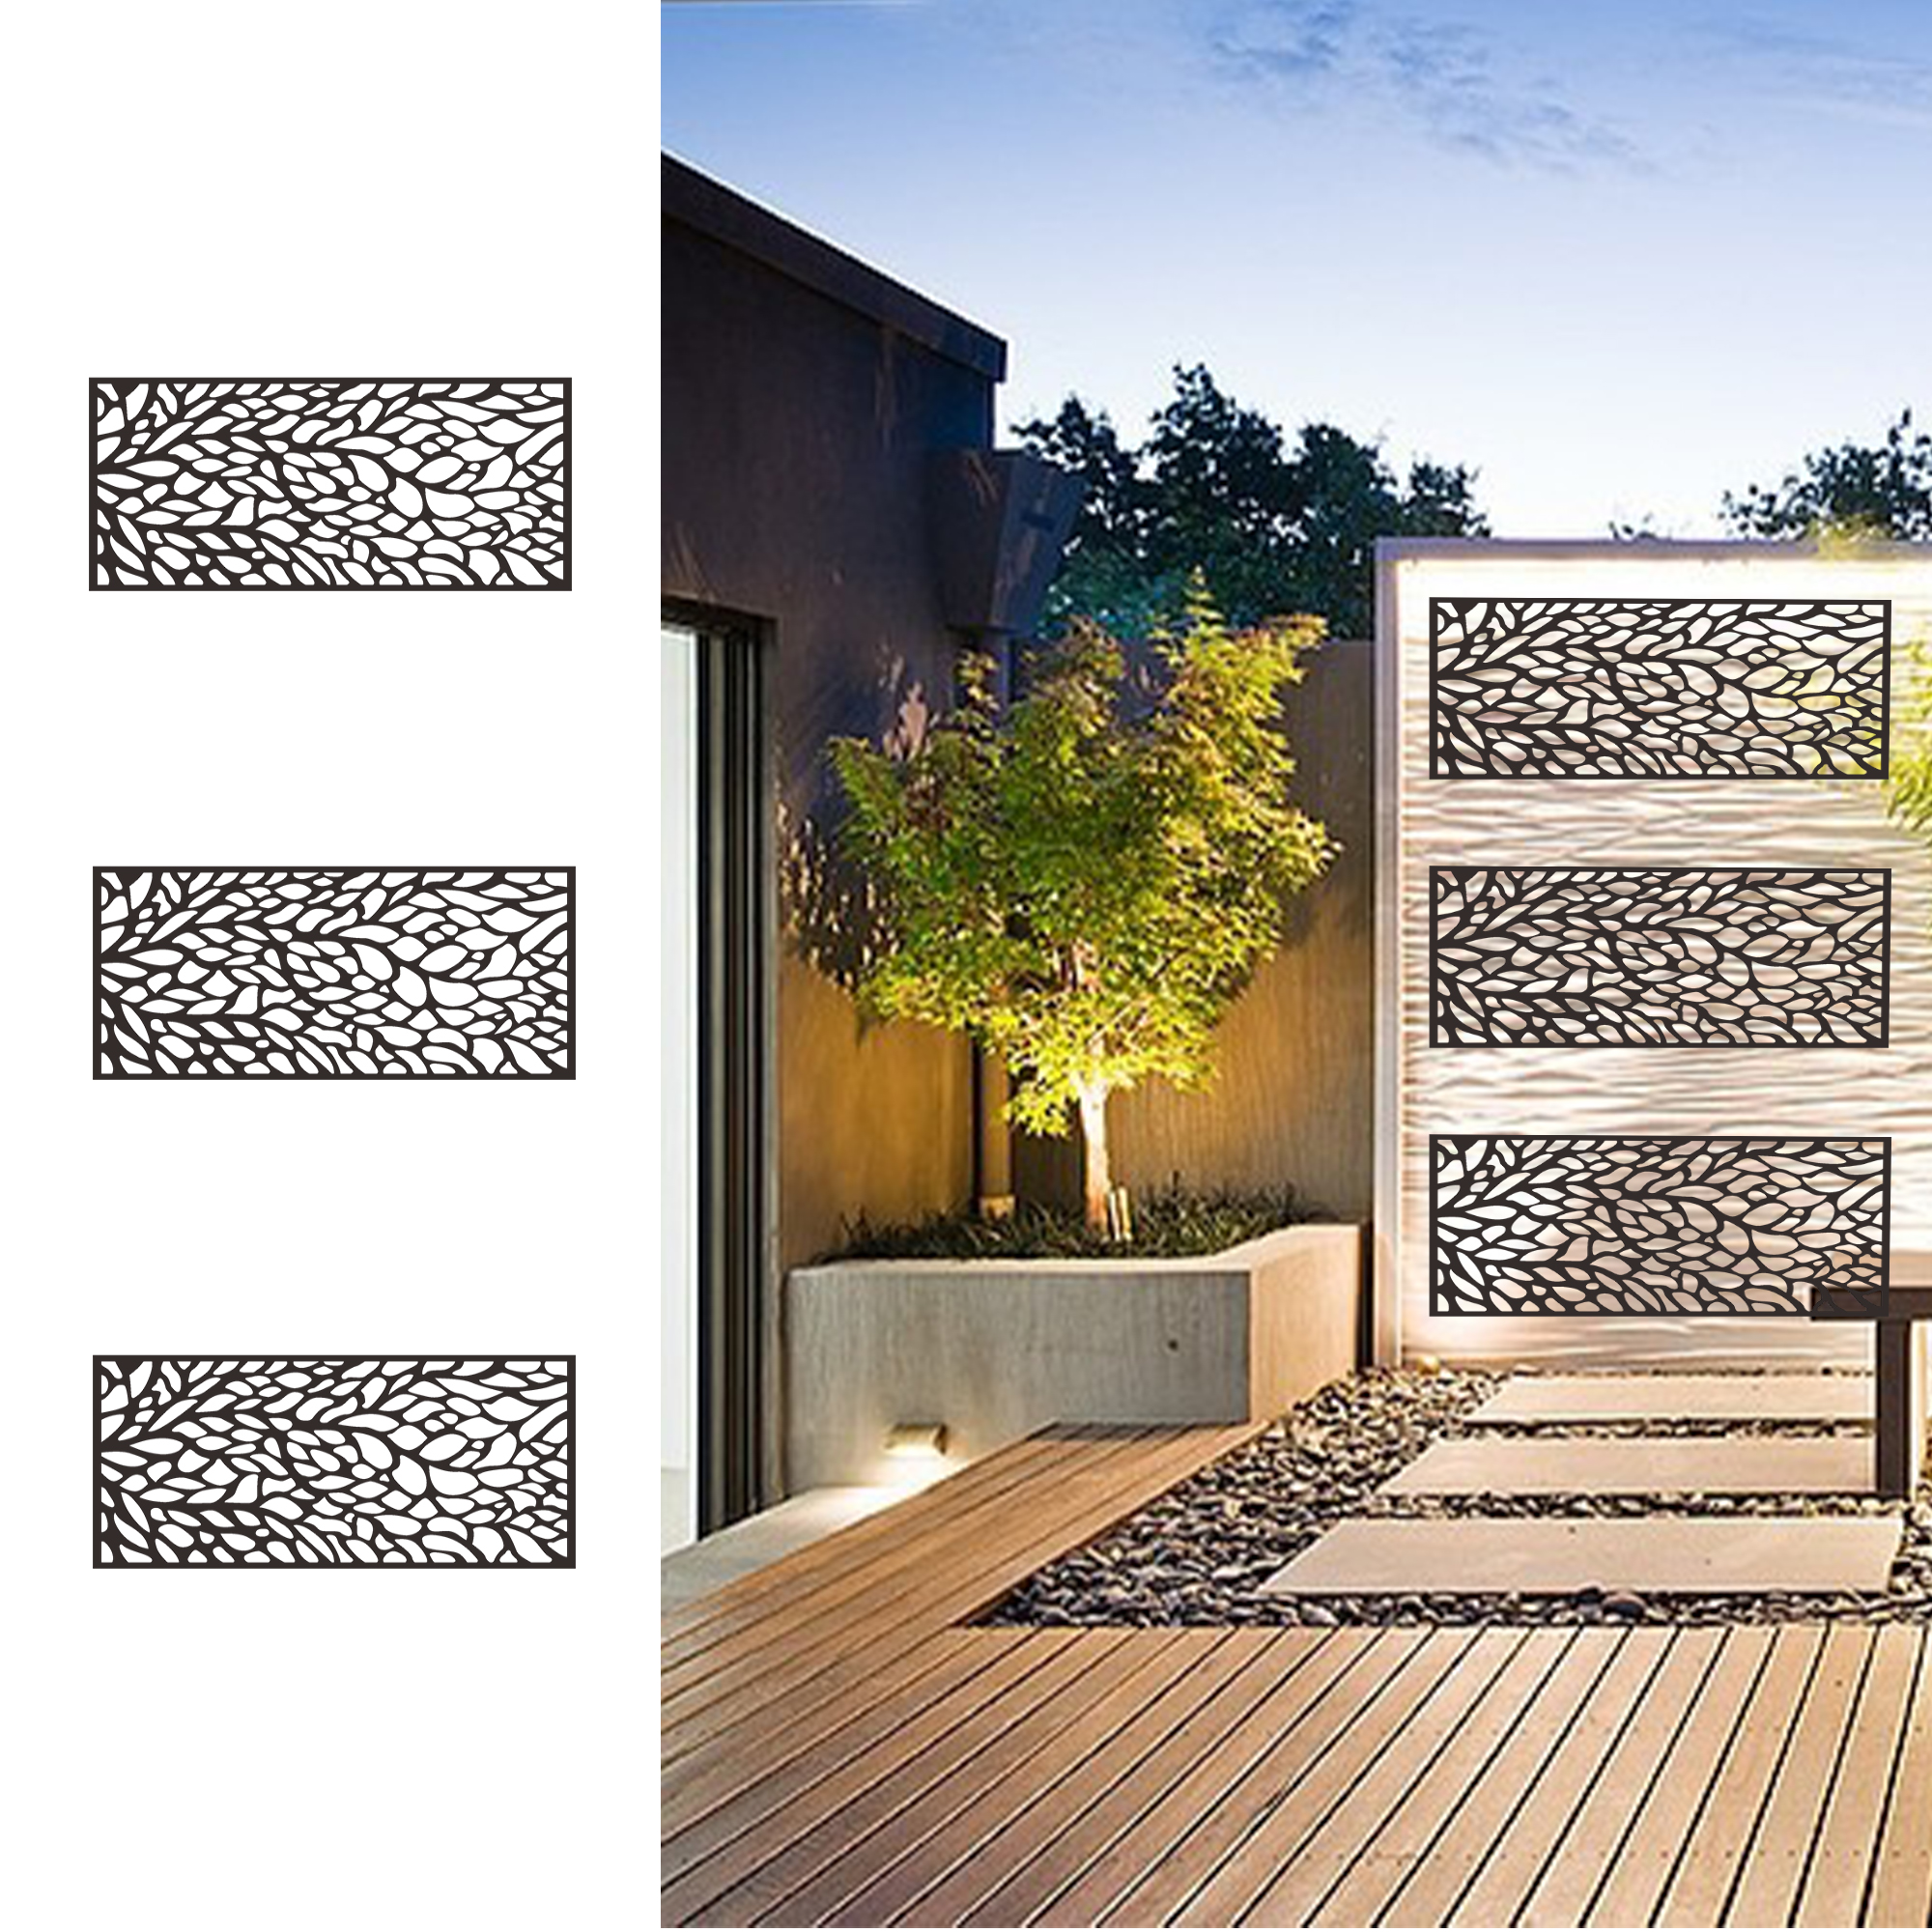 Project Gallery Outdoor Decorative Privacy Screens